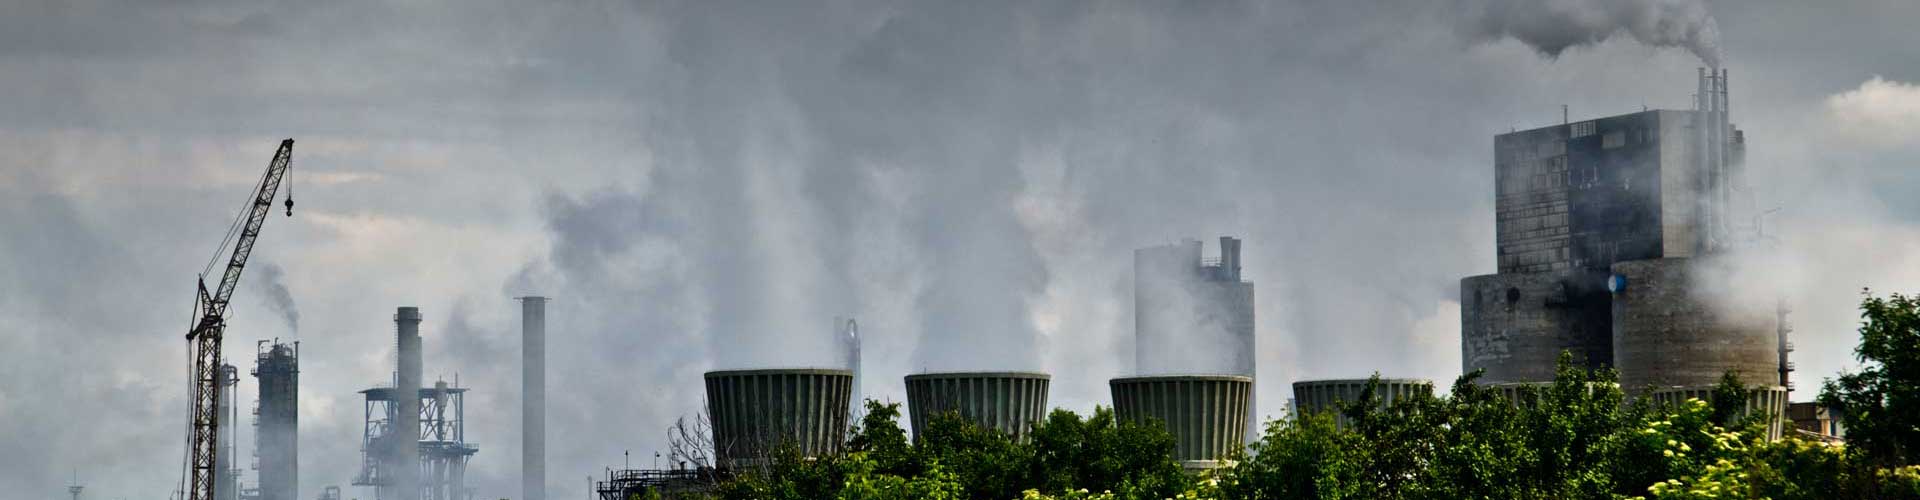 fossil fuels pollution spewing from smoke stacks